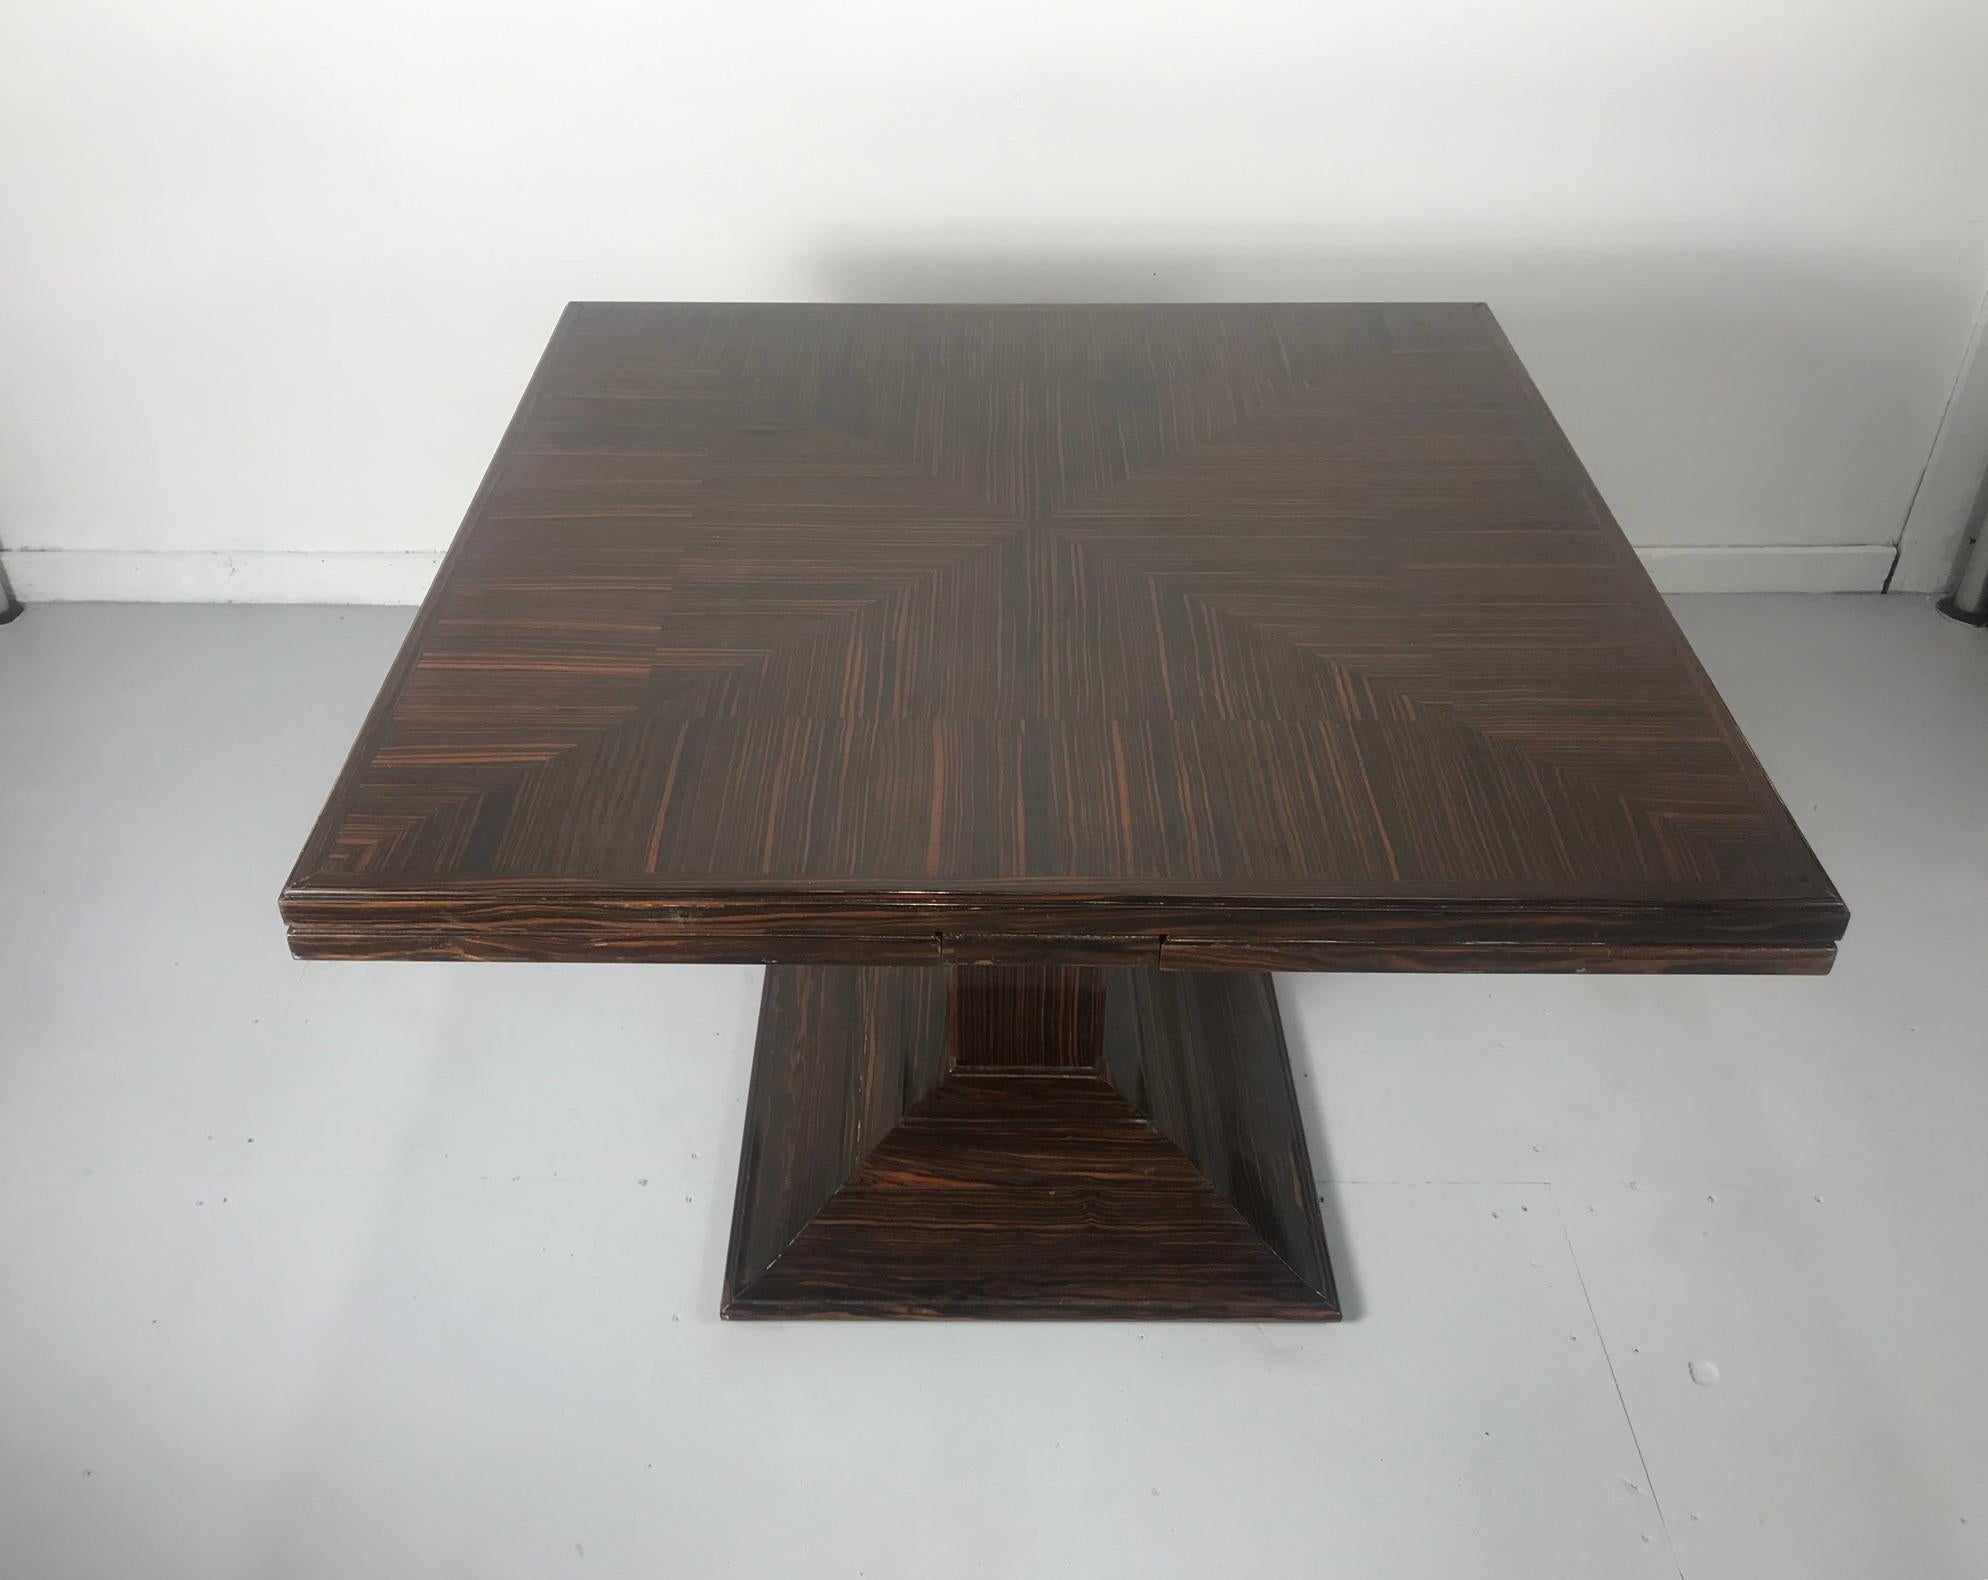 Beautiful and rare example, Art Deco extension table, model 1315 NR, circa 1929, Stampted Ruhlmann and a, stunning figured, richly grained Macassar ebony wood, edge veneer loss.

Measures: Closed: Height 29 5/8, width 41 3/8, depth 29